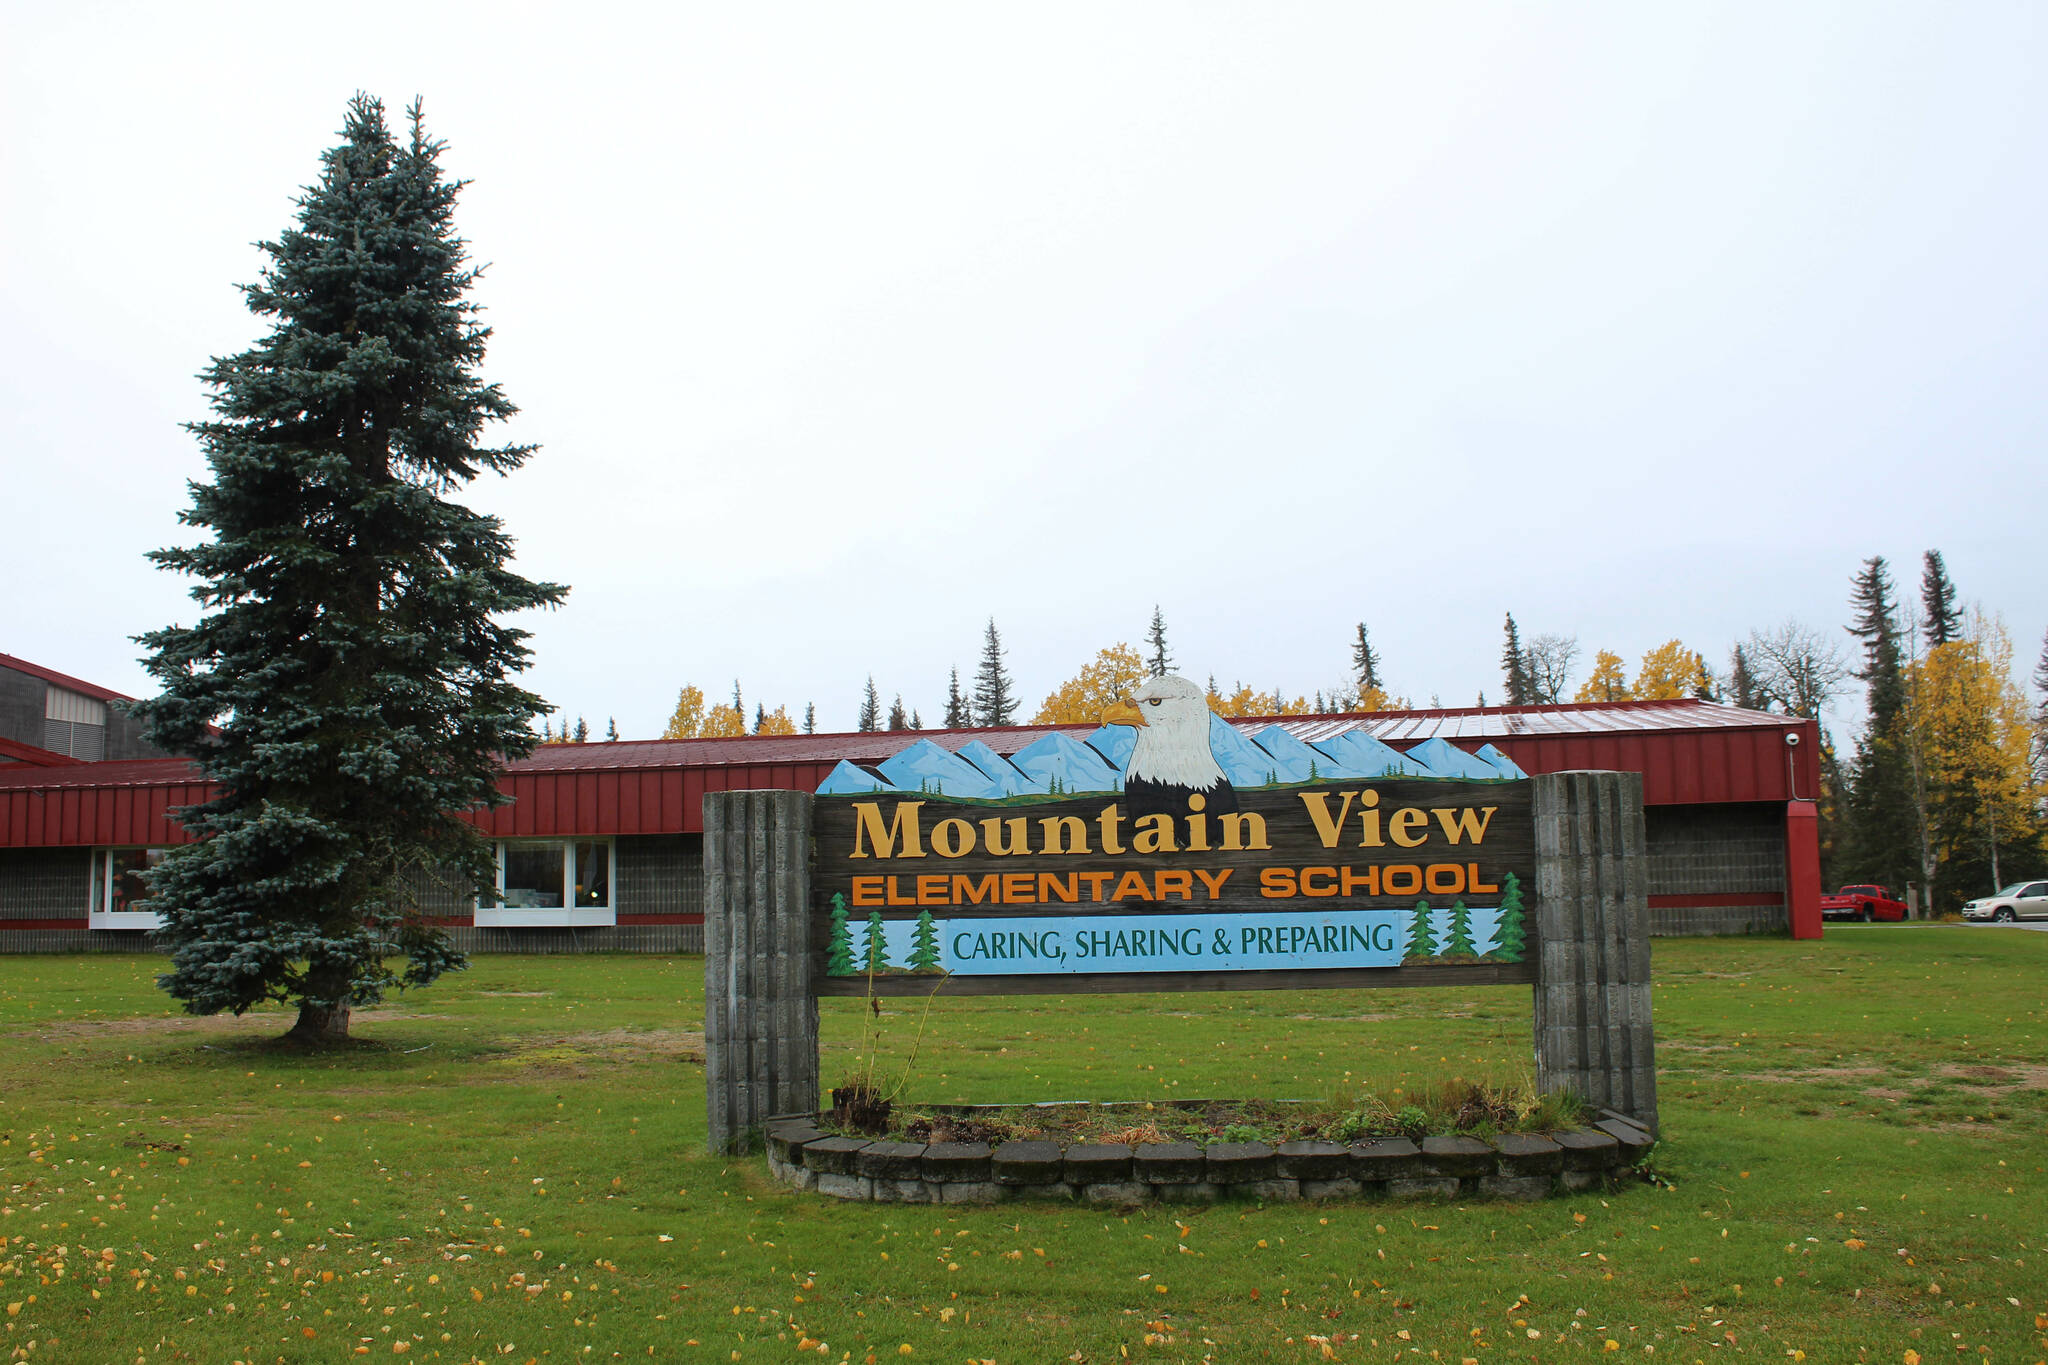 Fall leaves surround the welcome sign at Mountain View Elementary School on Thursday, Sept. 29, 2022, in Kenai, Alaska. (Ashlyn O’Hara/Peninsula Clarion)